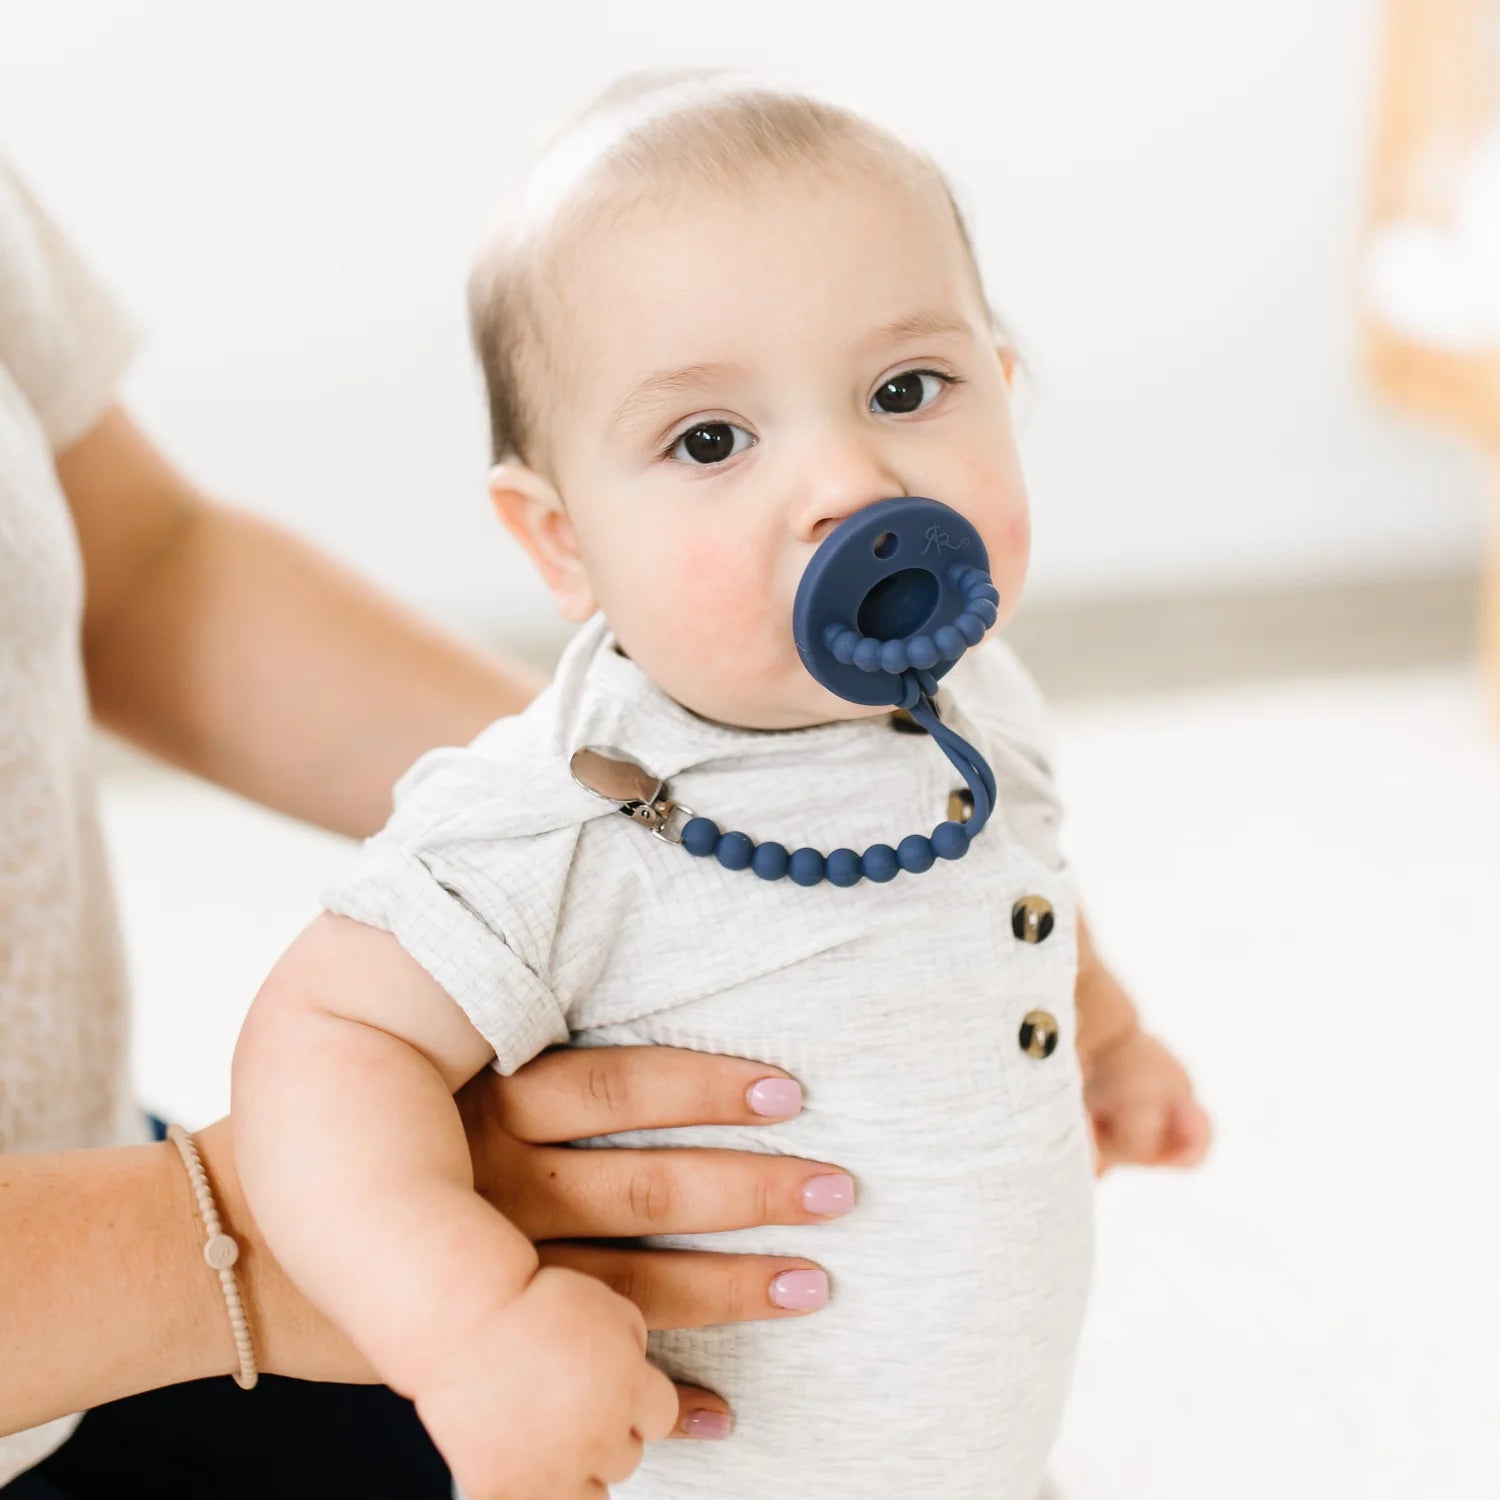 Baby wearing pacifier and clip